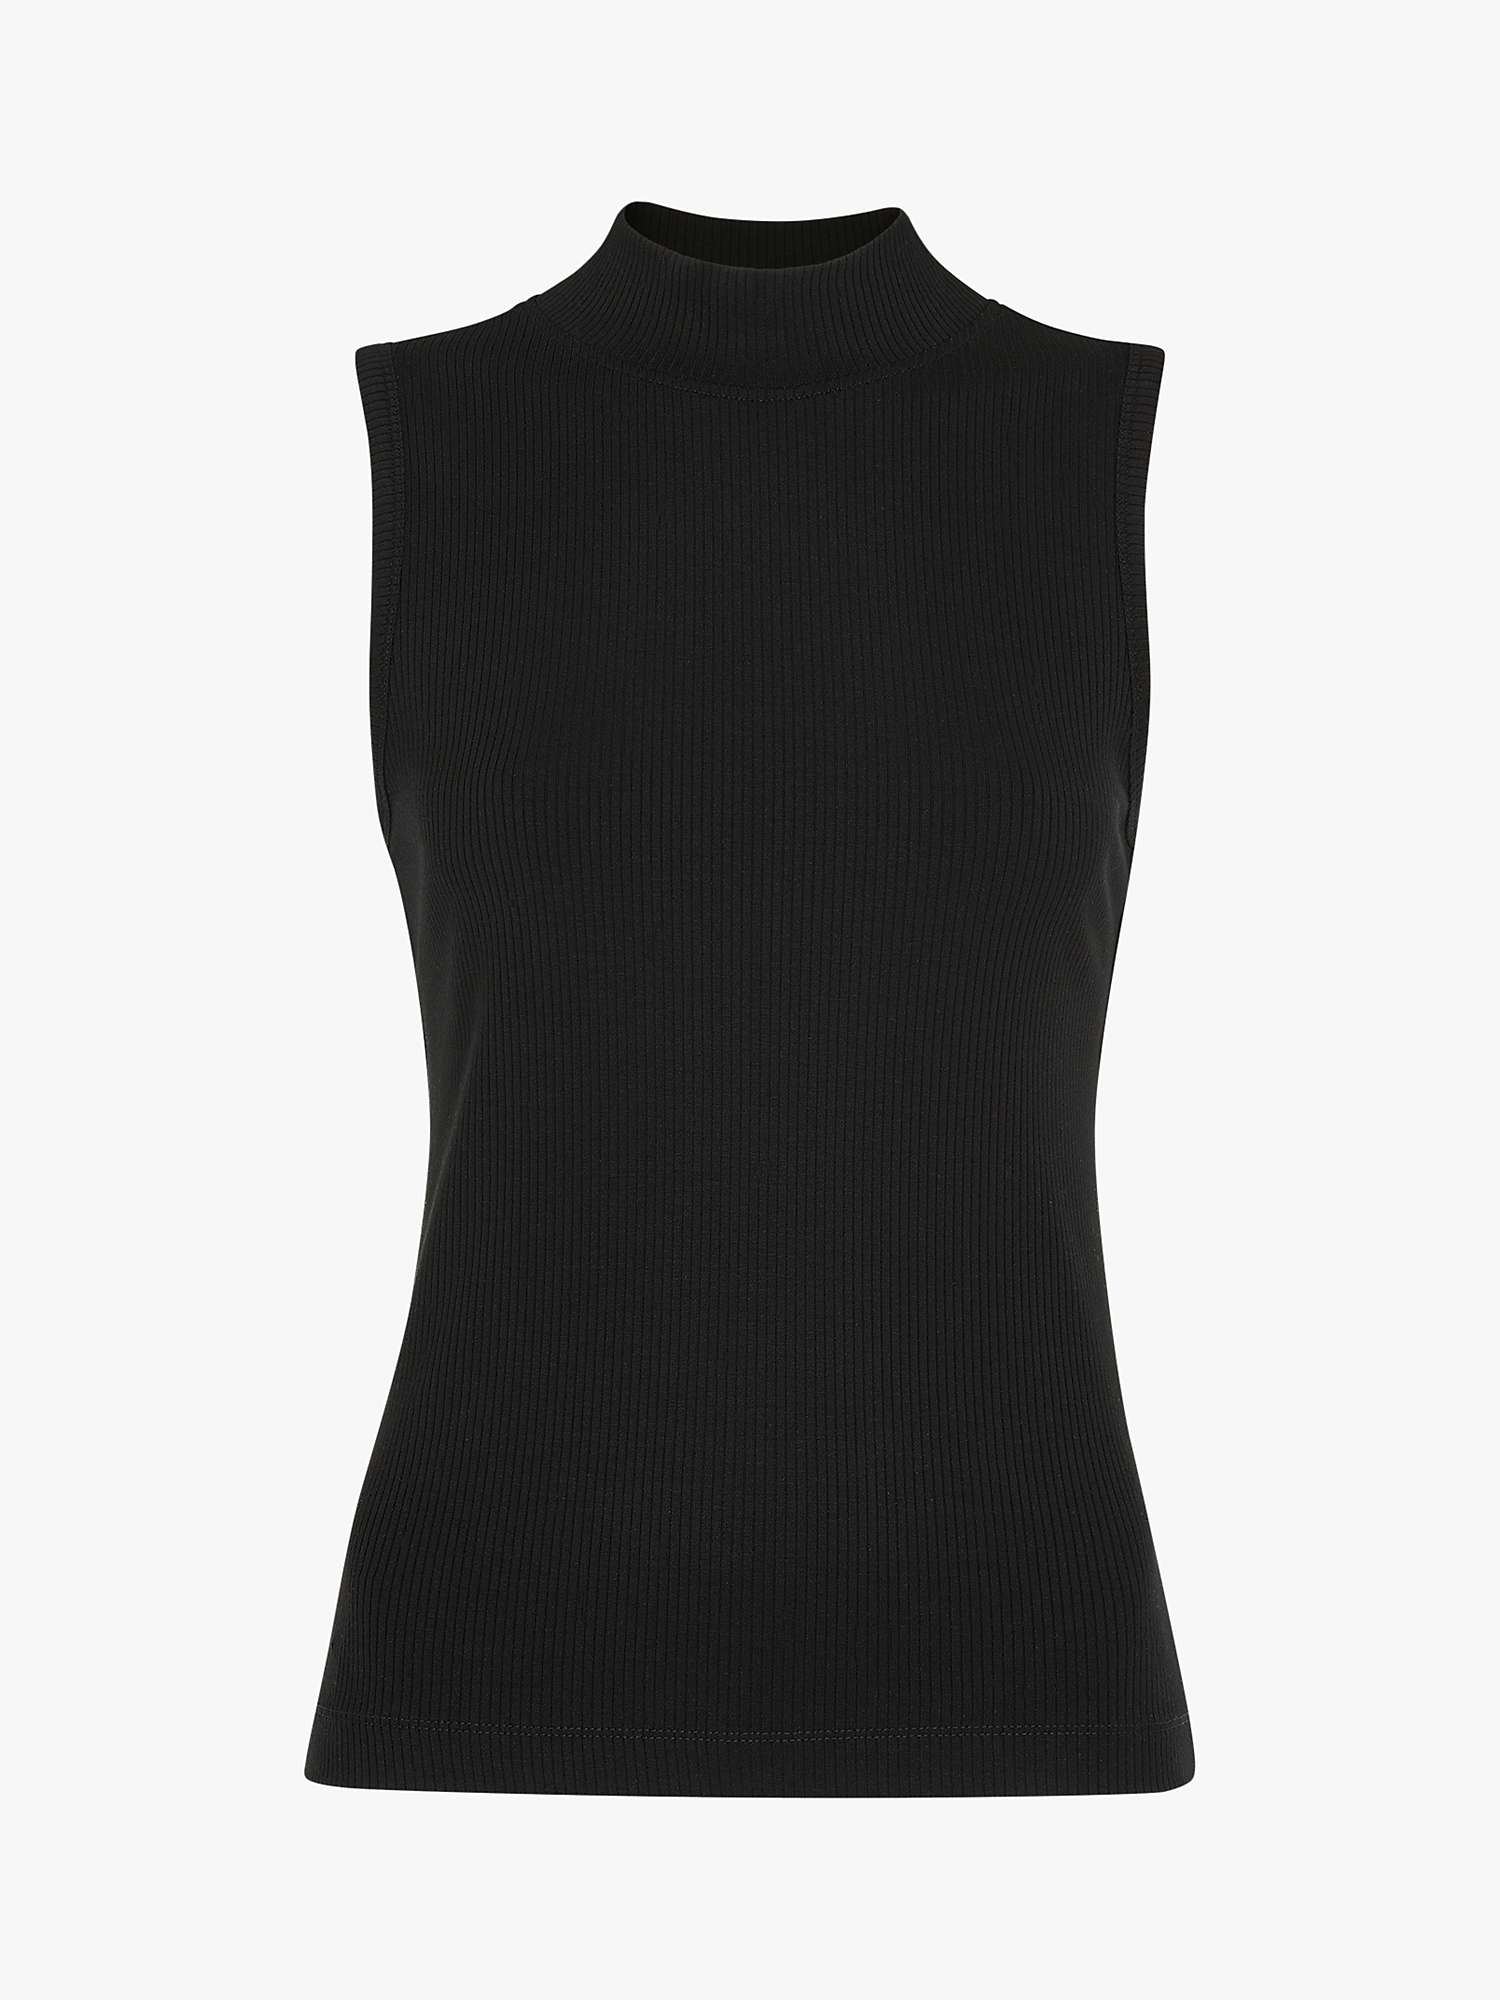 Buy Whistles Ribbed Keyhole Tank Top Online at johnlewis.com